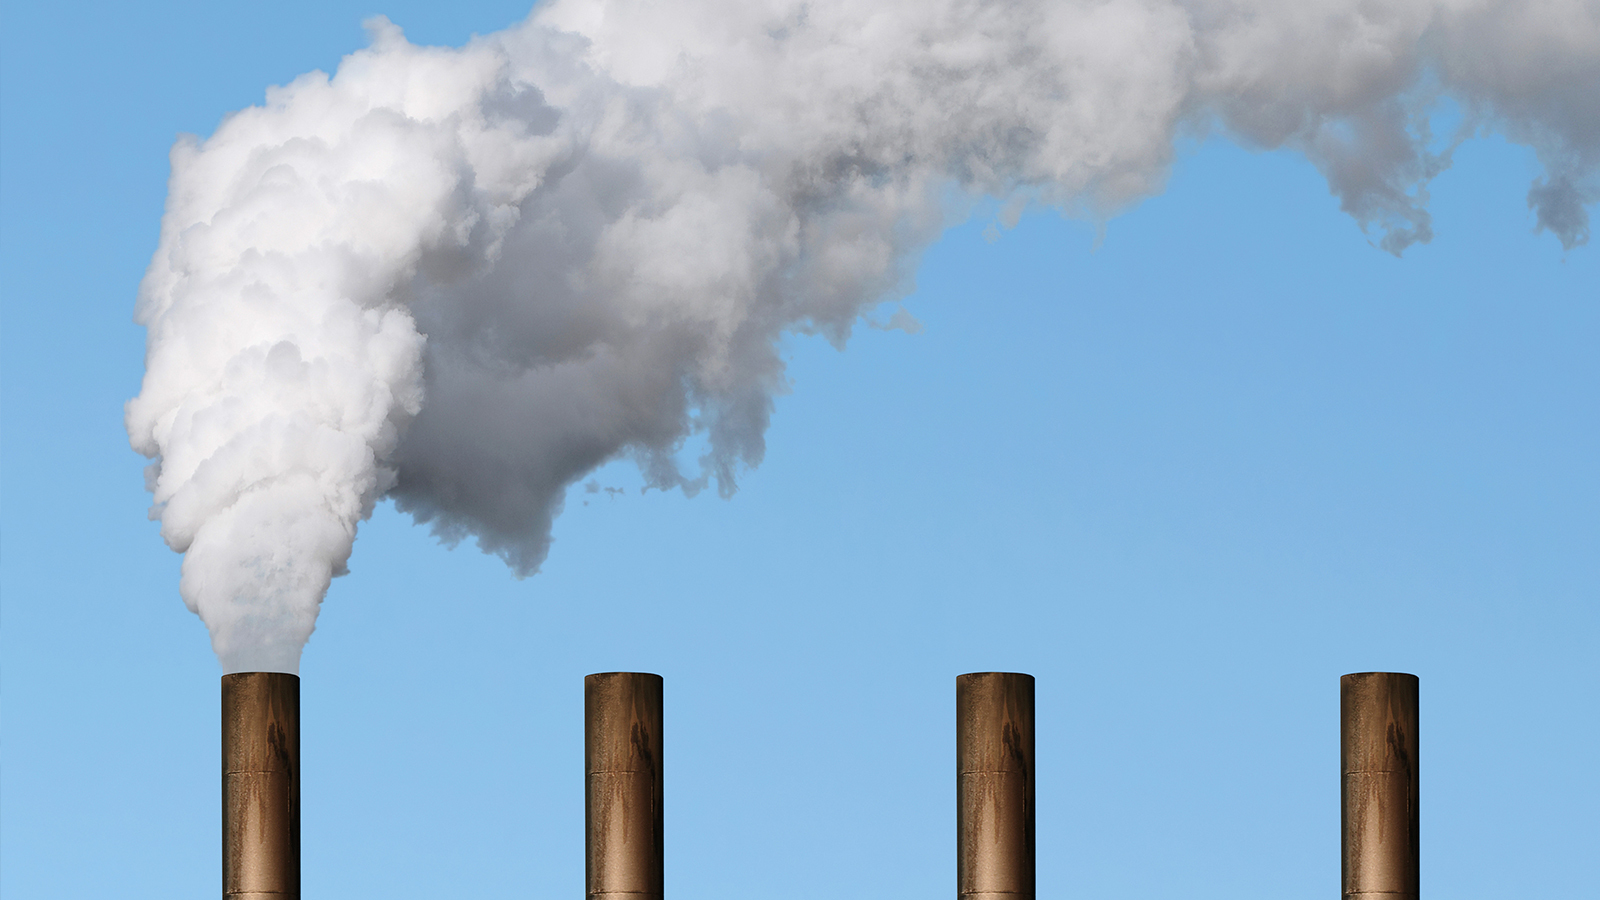 Four industrial smoke stacks with white smoke coming out of one